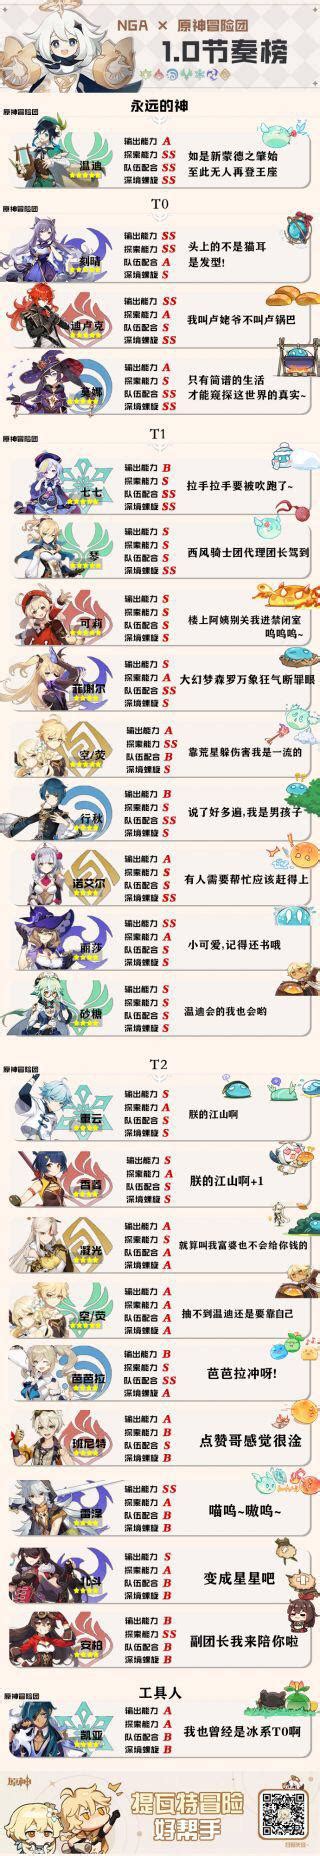 Genshin impact is a game from studio mihoyo released on september 28 for ps4, pc, android and ios. Another Chinese OBT tier list : Genshin_Impact